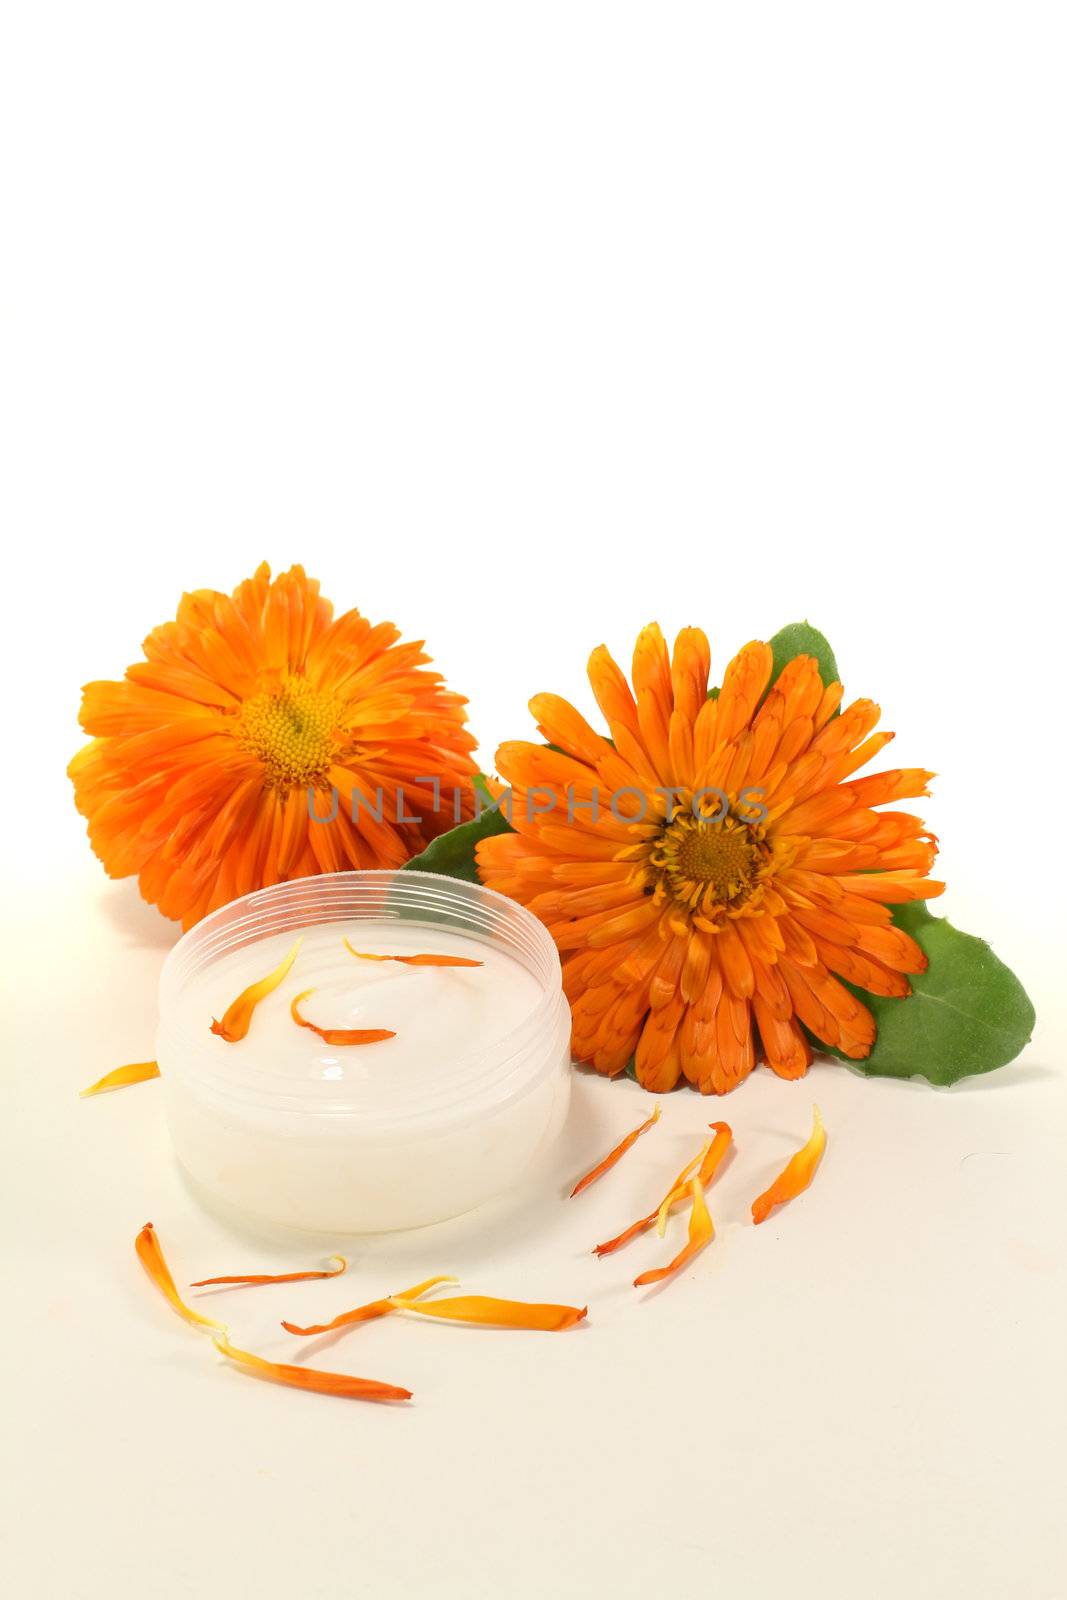 Calendula ointment with marigold flowers, leaves and petals on a light background